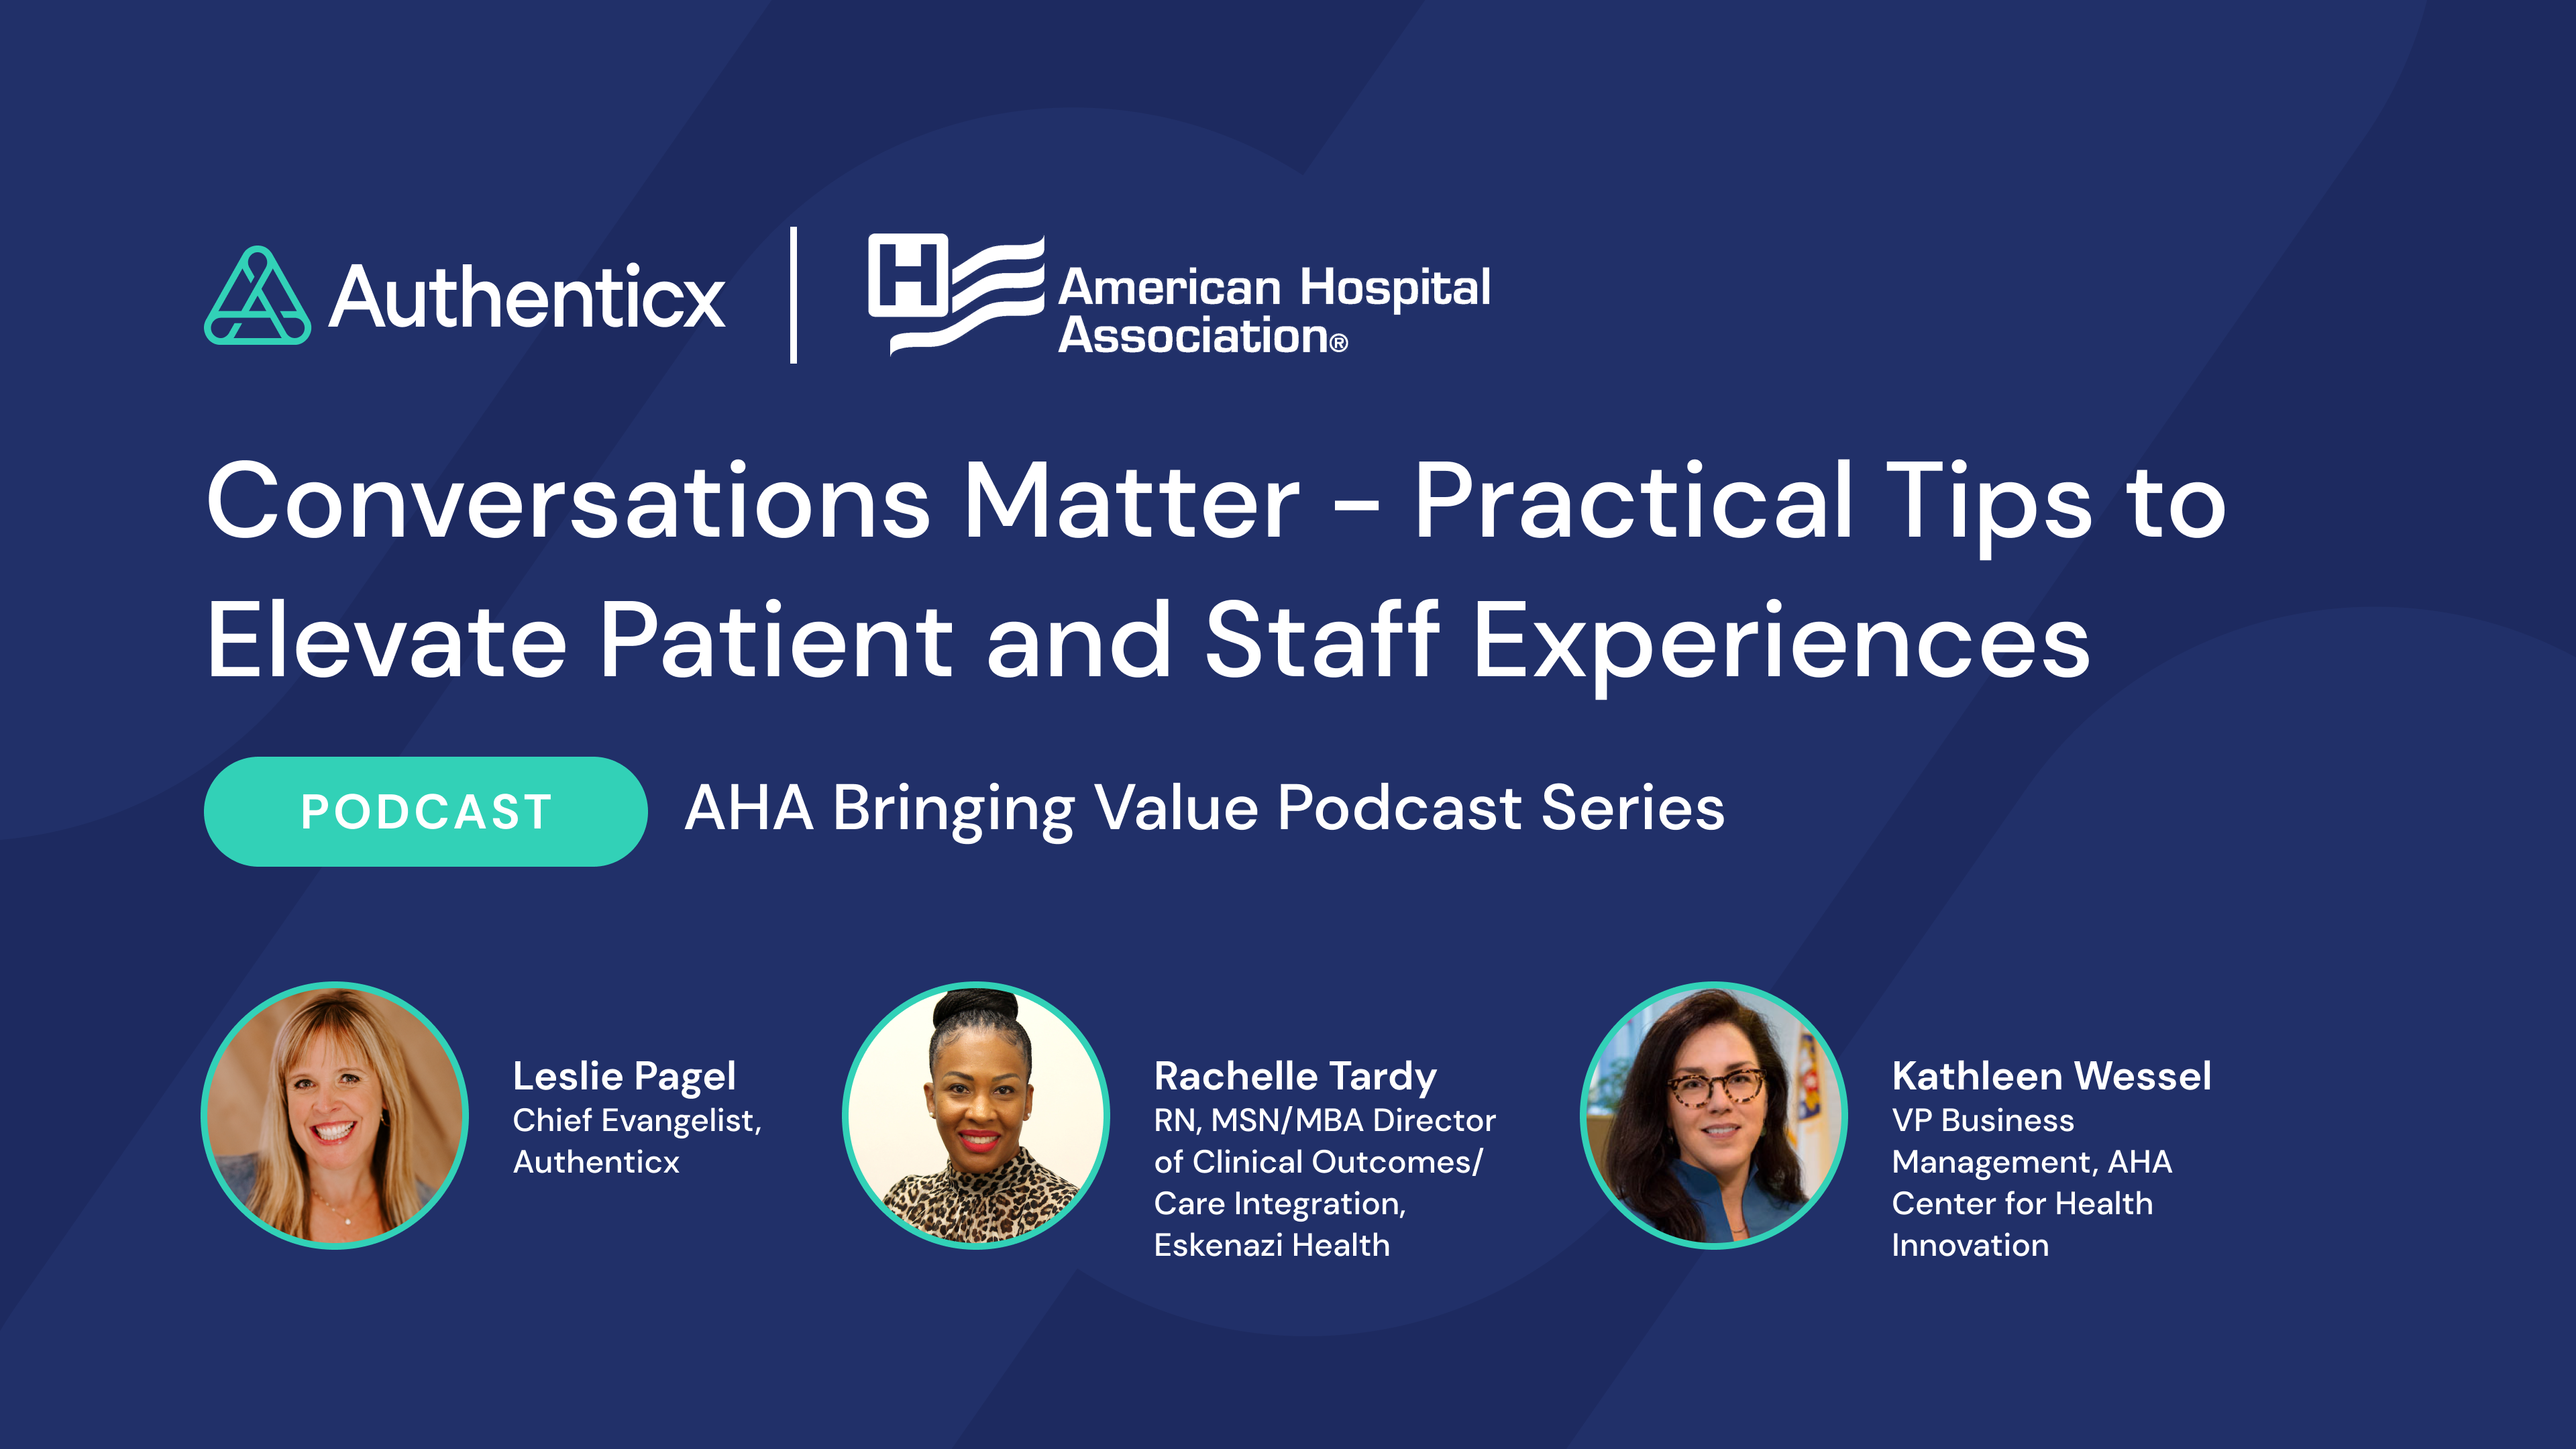 Enhancing the Patient Experience Through Employee Conversations | AHA Associates Bringing Value Podcast